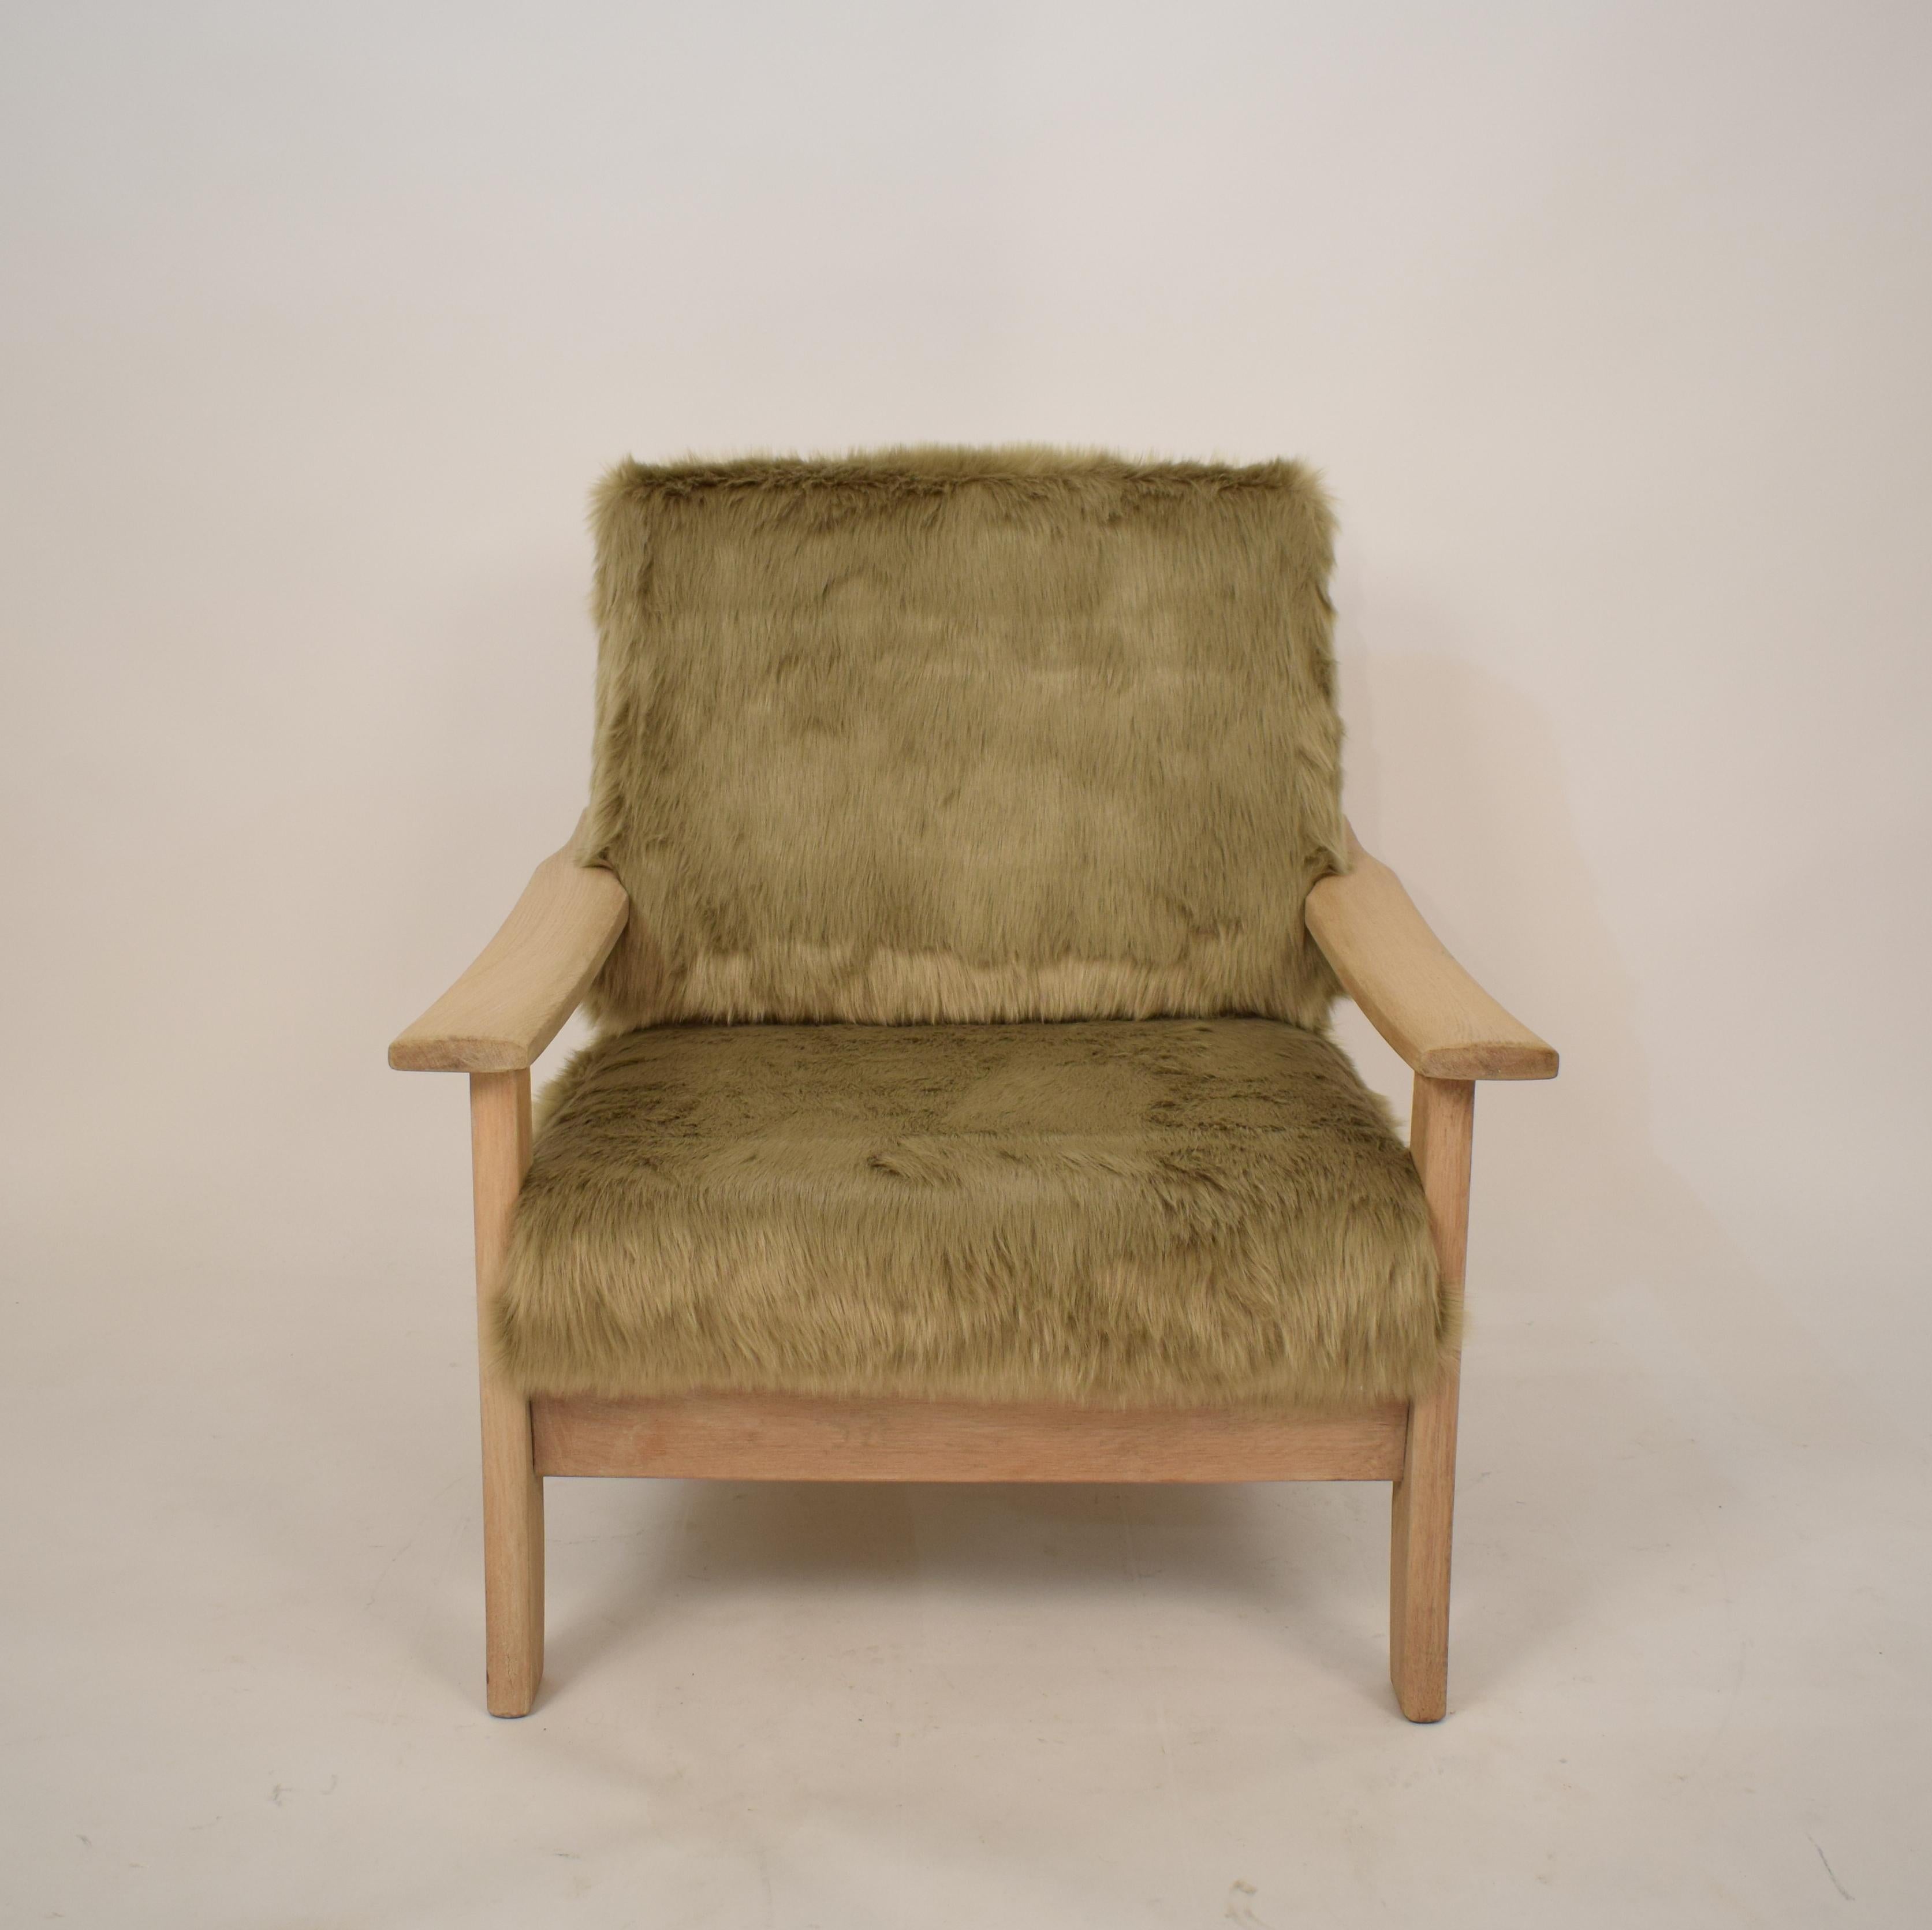 This cool Mid-Century Modern Scandinavian armchair was made circa 1970.
It is made out of solid Light oakwood and was recently 
upholstered in faux fur.
It has this special big foot look!
A unique piece which is a great eyecatcher for your